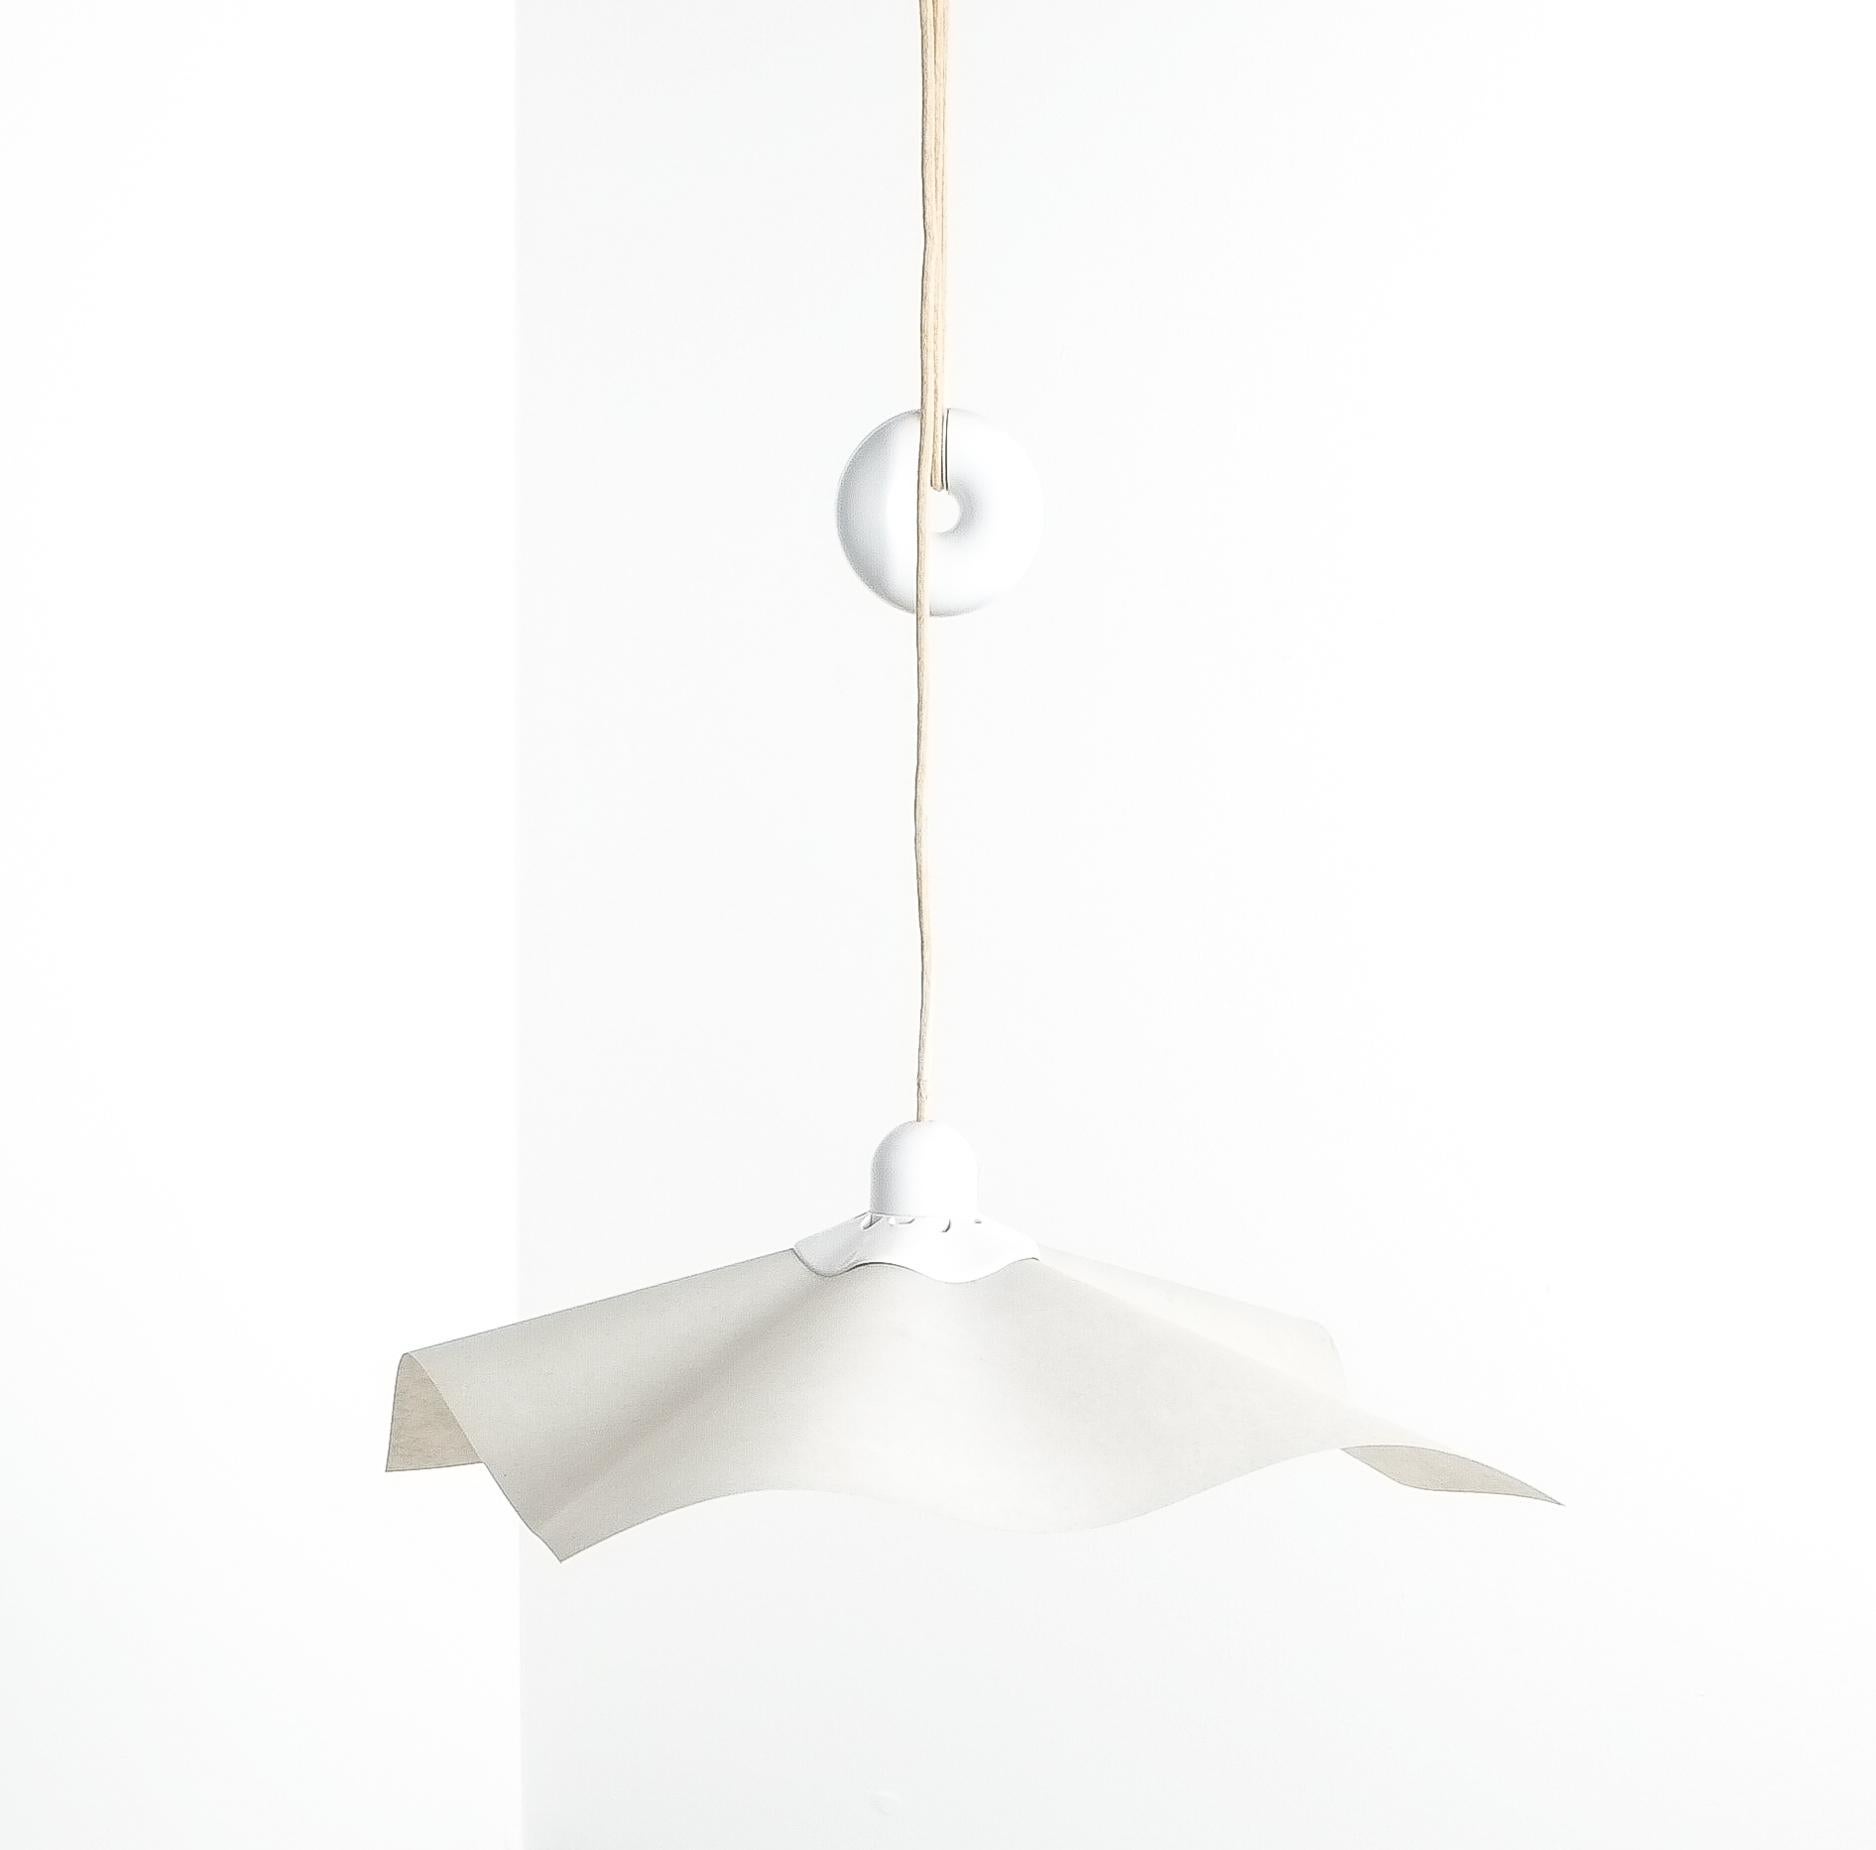 Mario Bellini Counterweight Pendant Lamp Area 50 by Artemide, Italy, 1976 For Sale 8